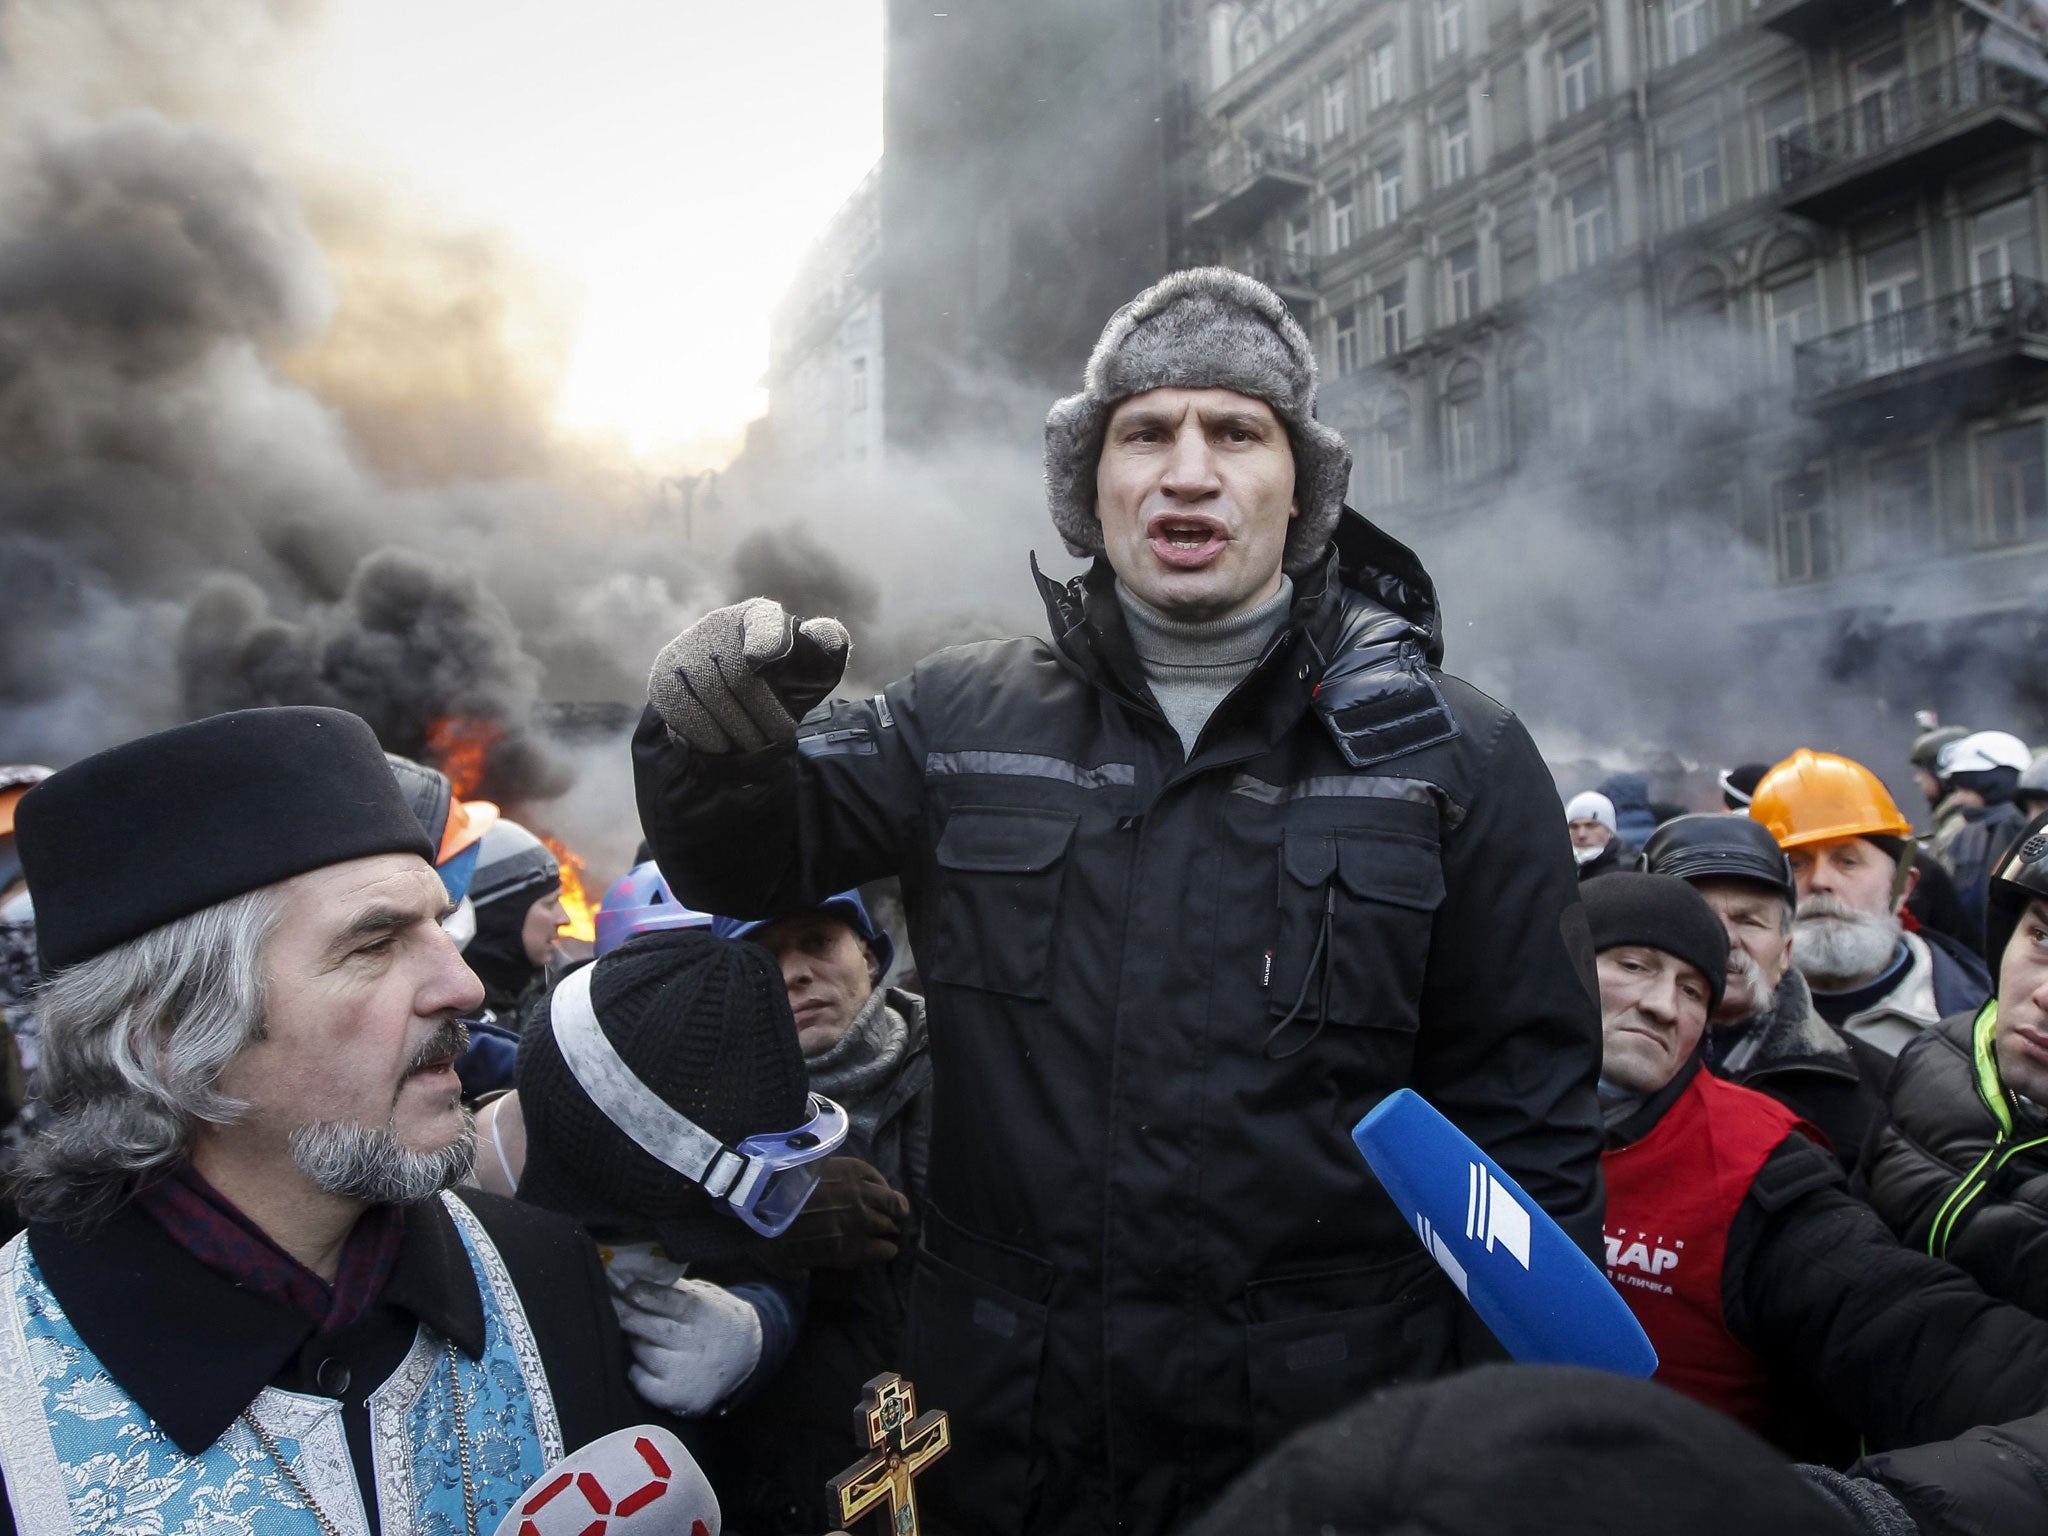 Klitschko talking with pro-European integration protesters at the site of clashes with riot police in Kiev in January 2014 (Reuters)